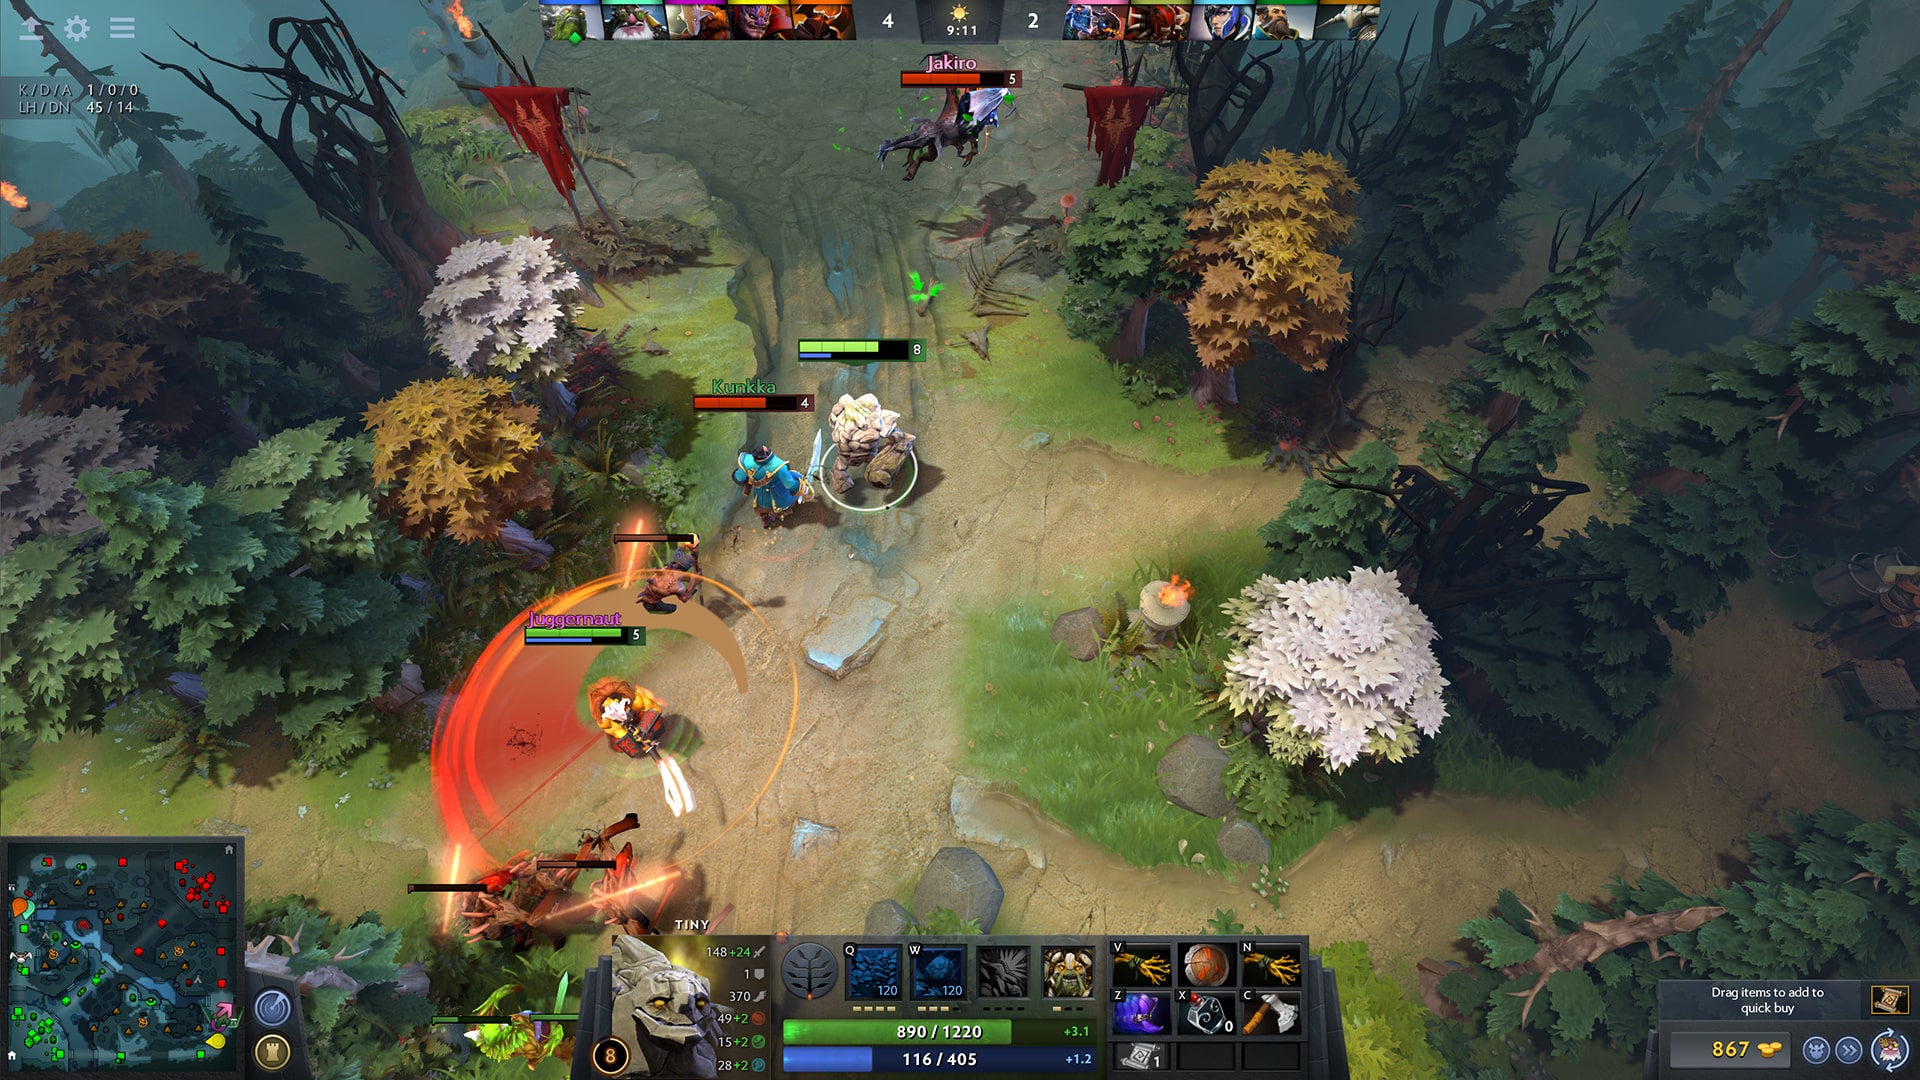 Epic clash of heroes in a Dota 2 match